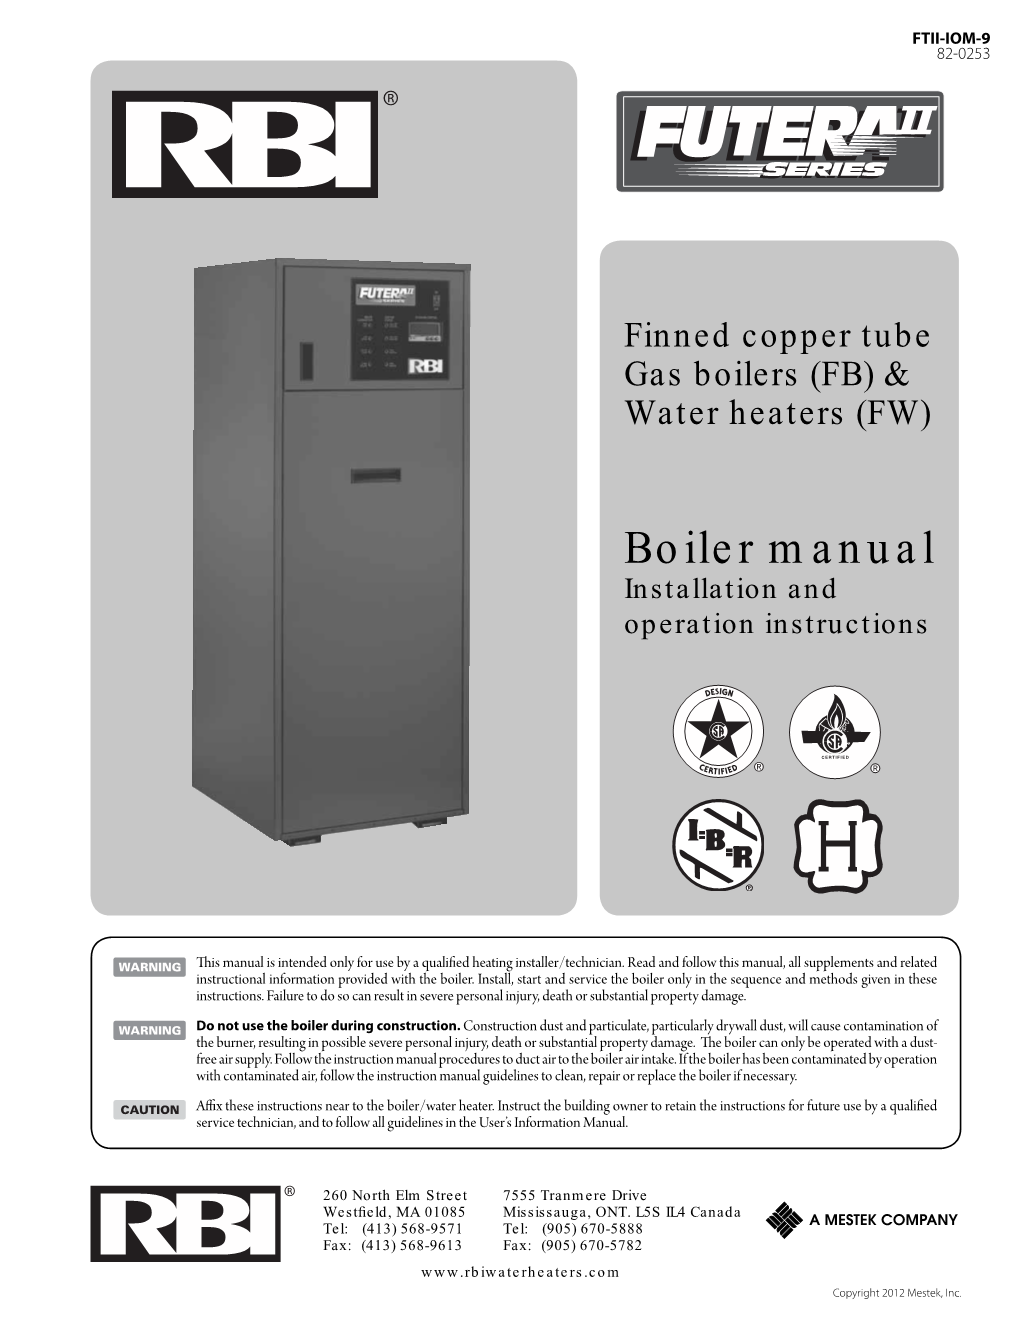 Boiler Manual Installation and Operation Instructions